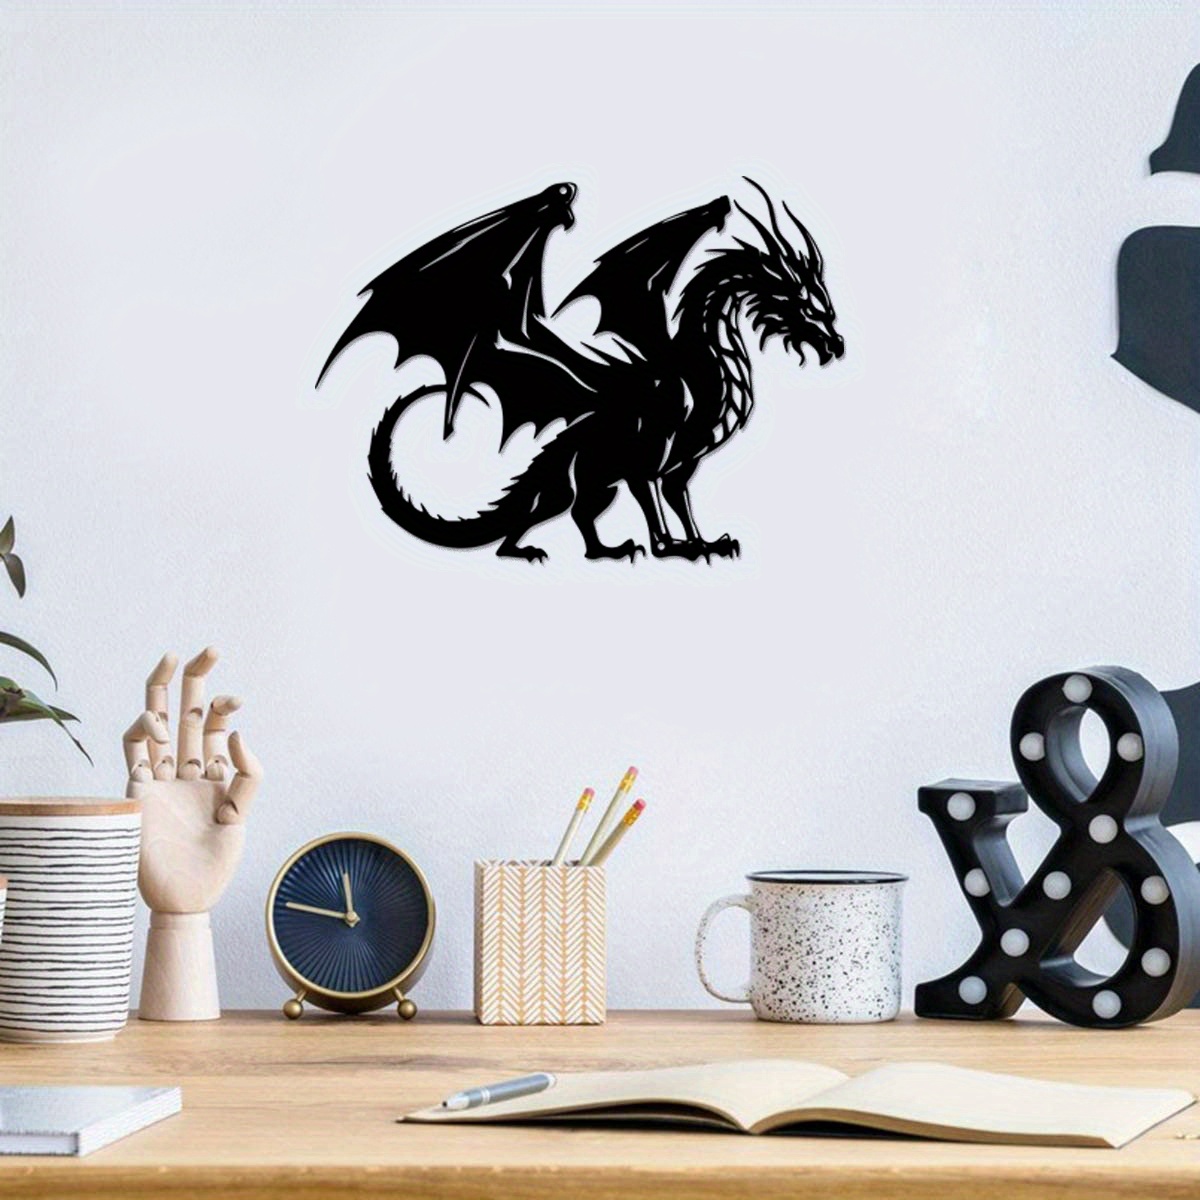 

1pc, Medieval Dragon Metal Wall Art, Classic Style, Decorative Black Silhouette For Living Room, Bedroom, Shop Decor, Festive Gift